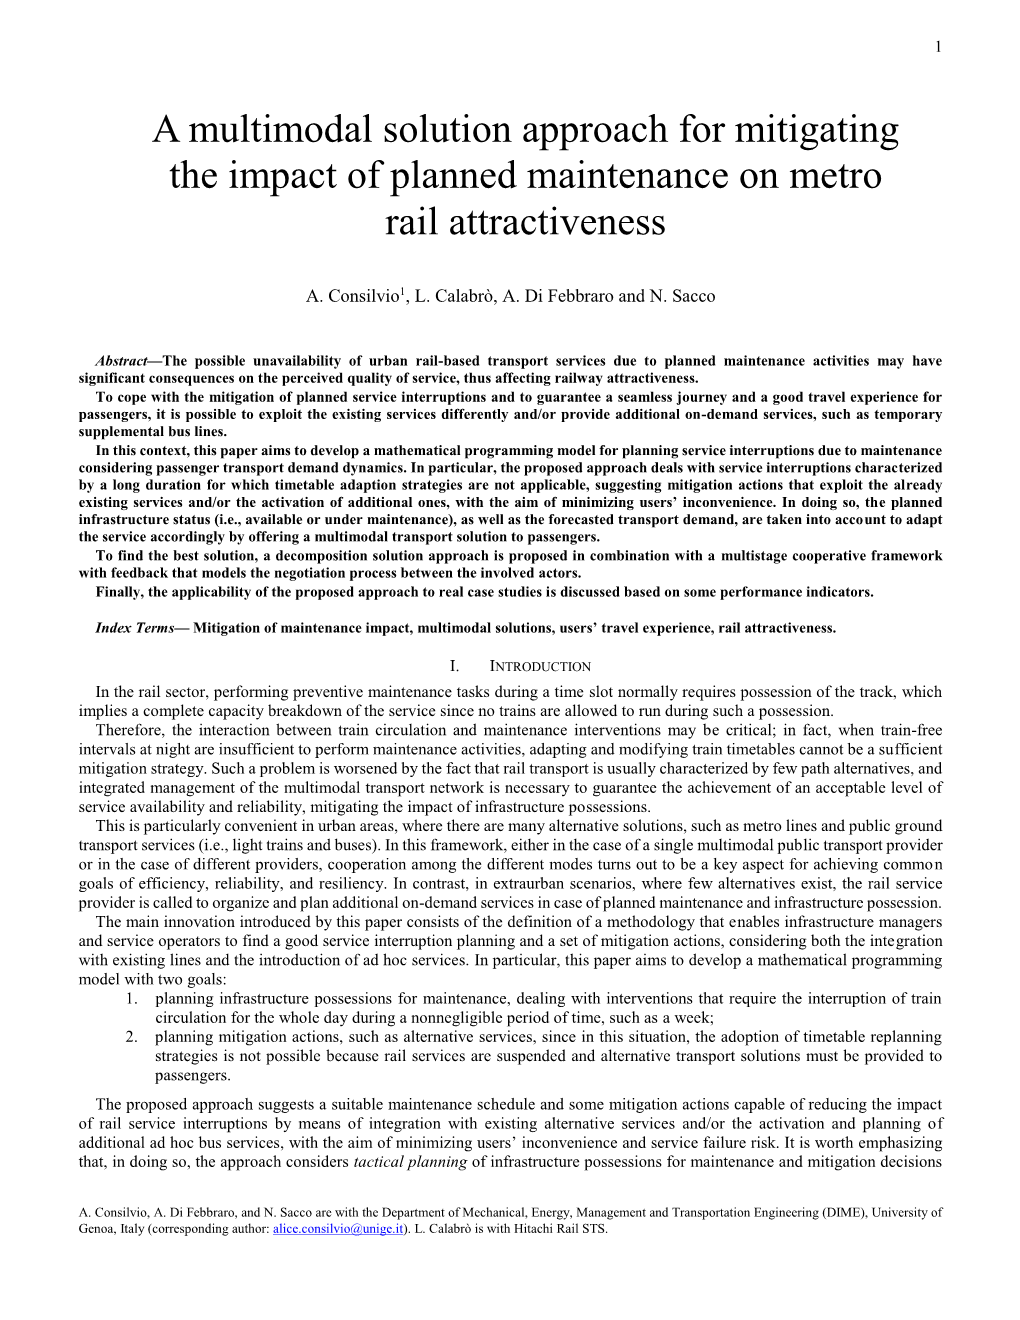 A Multimodal Solution Approach for Mitigating the Impact of Planned Maintenance on Metro Rail Attractiveness